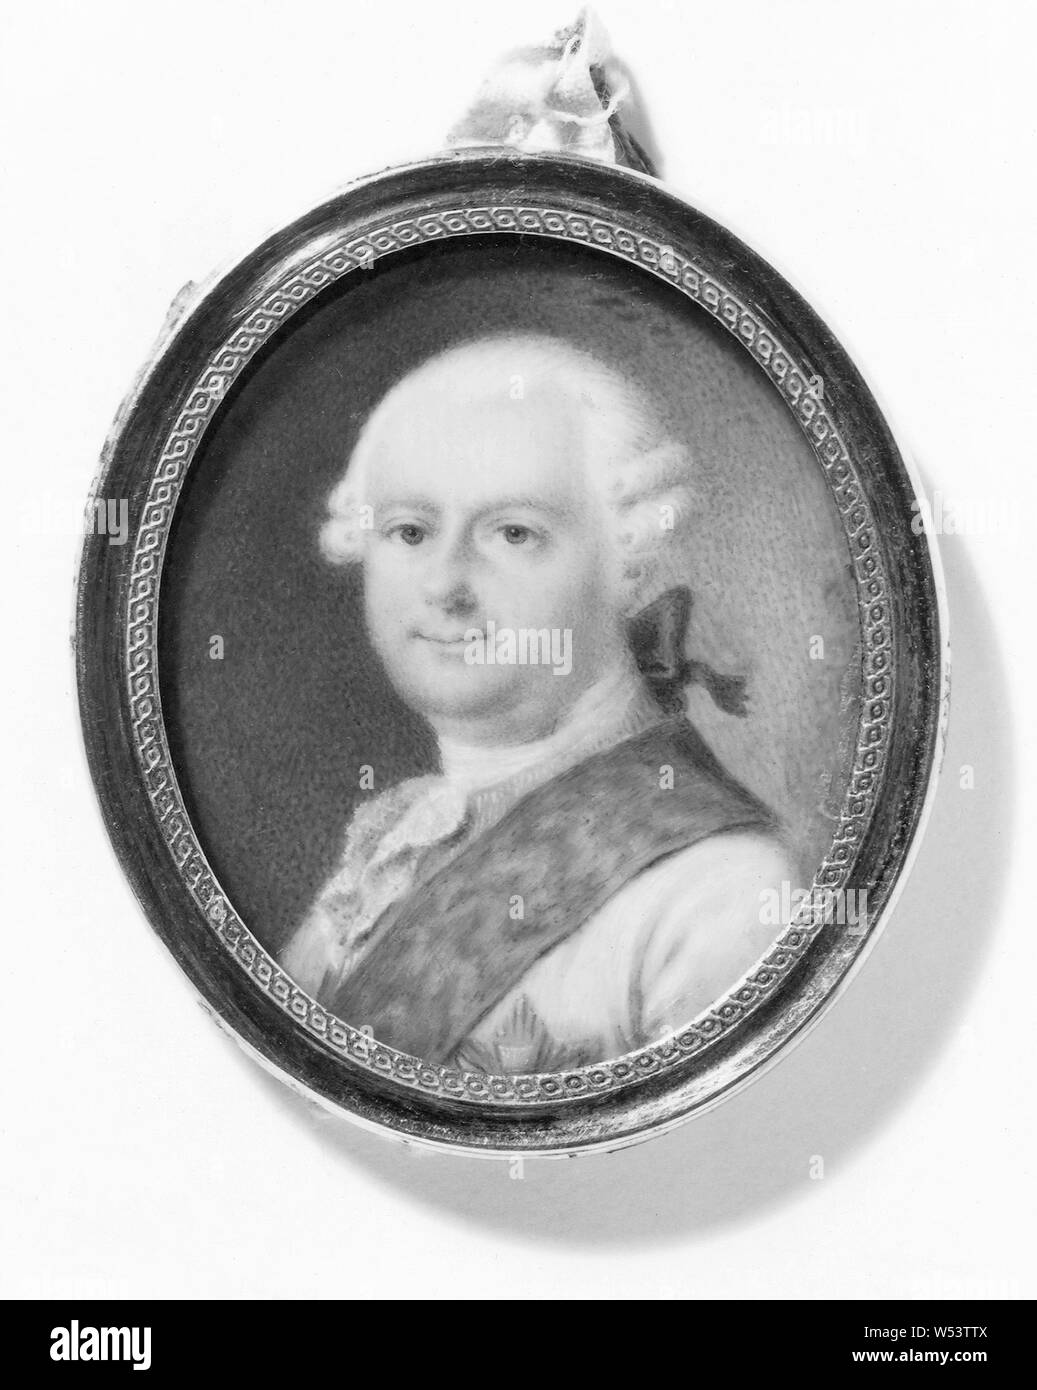 Friedrich Jakob Hill, Georg Wilhelm, 1722-82, country count of Hessen-Darmstadt, painting, Watercolor on ivory, Height, 4.4 cm (1.7 inches), Width, 3.7 cm (1.4 inches) Stock Photo